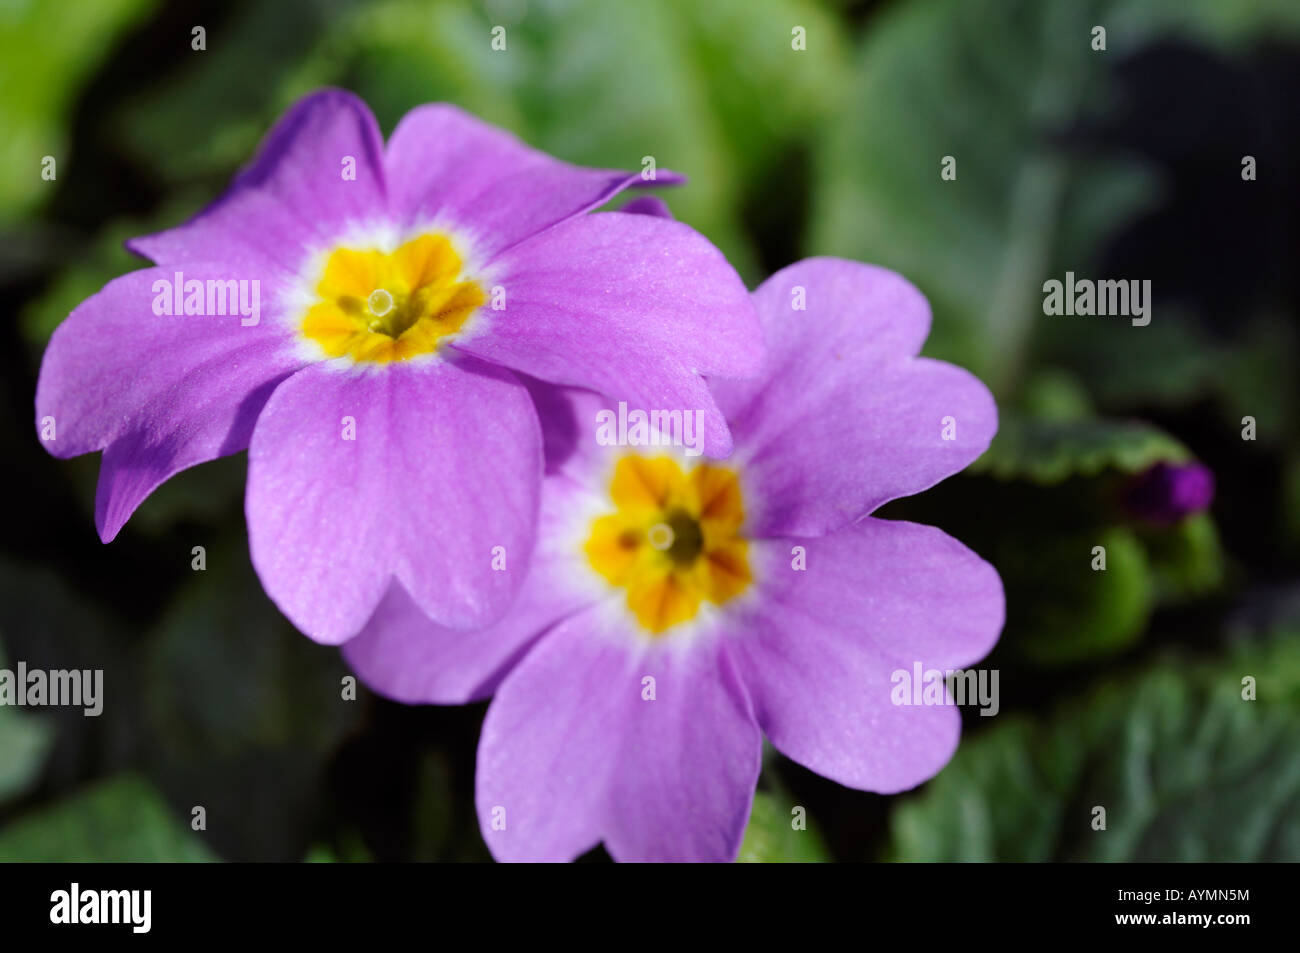 primula vulgaris subsp sibthorpii flowers purple yellow eye centre set against a green leafy leaf background Stock Photo